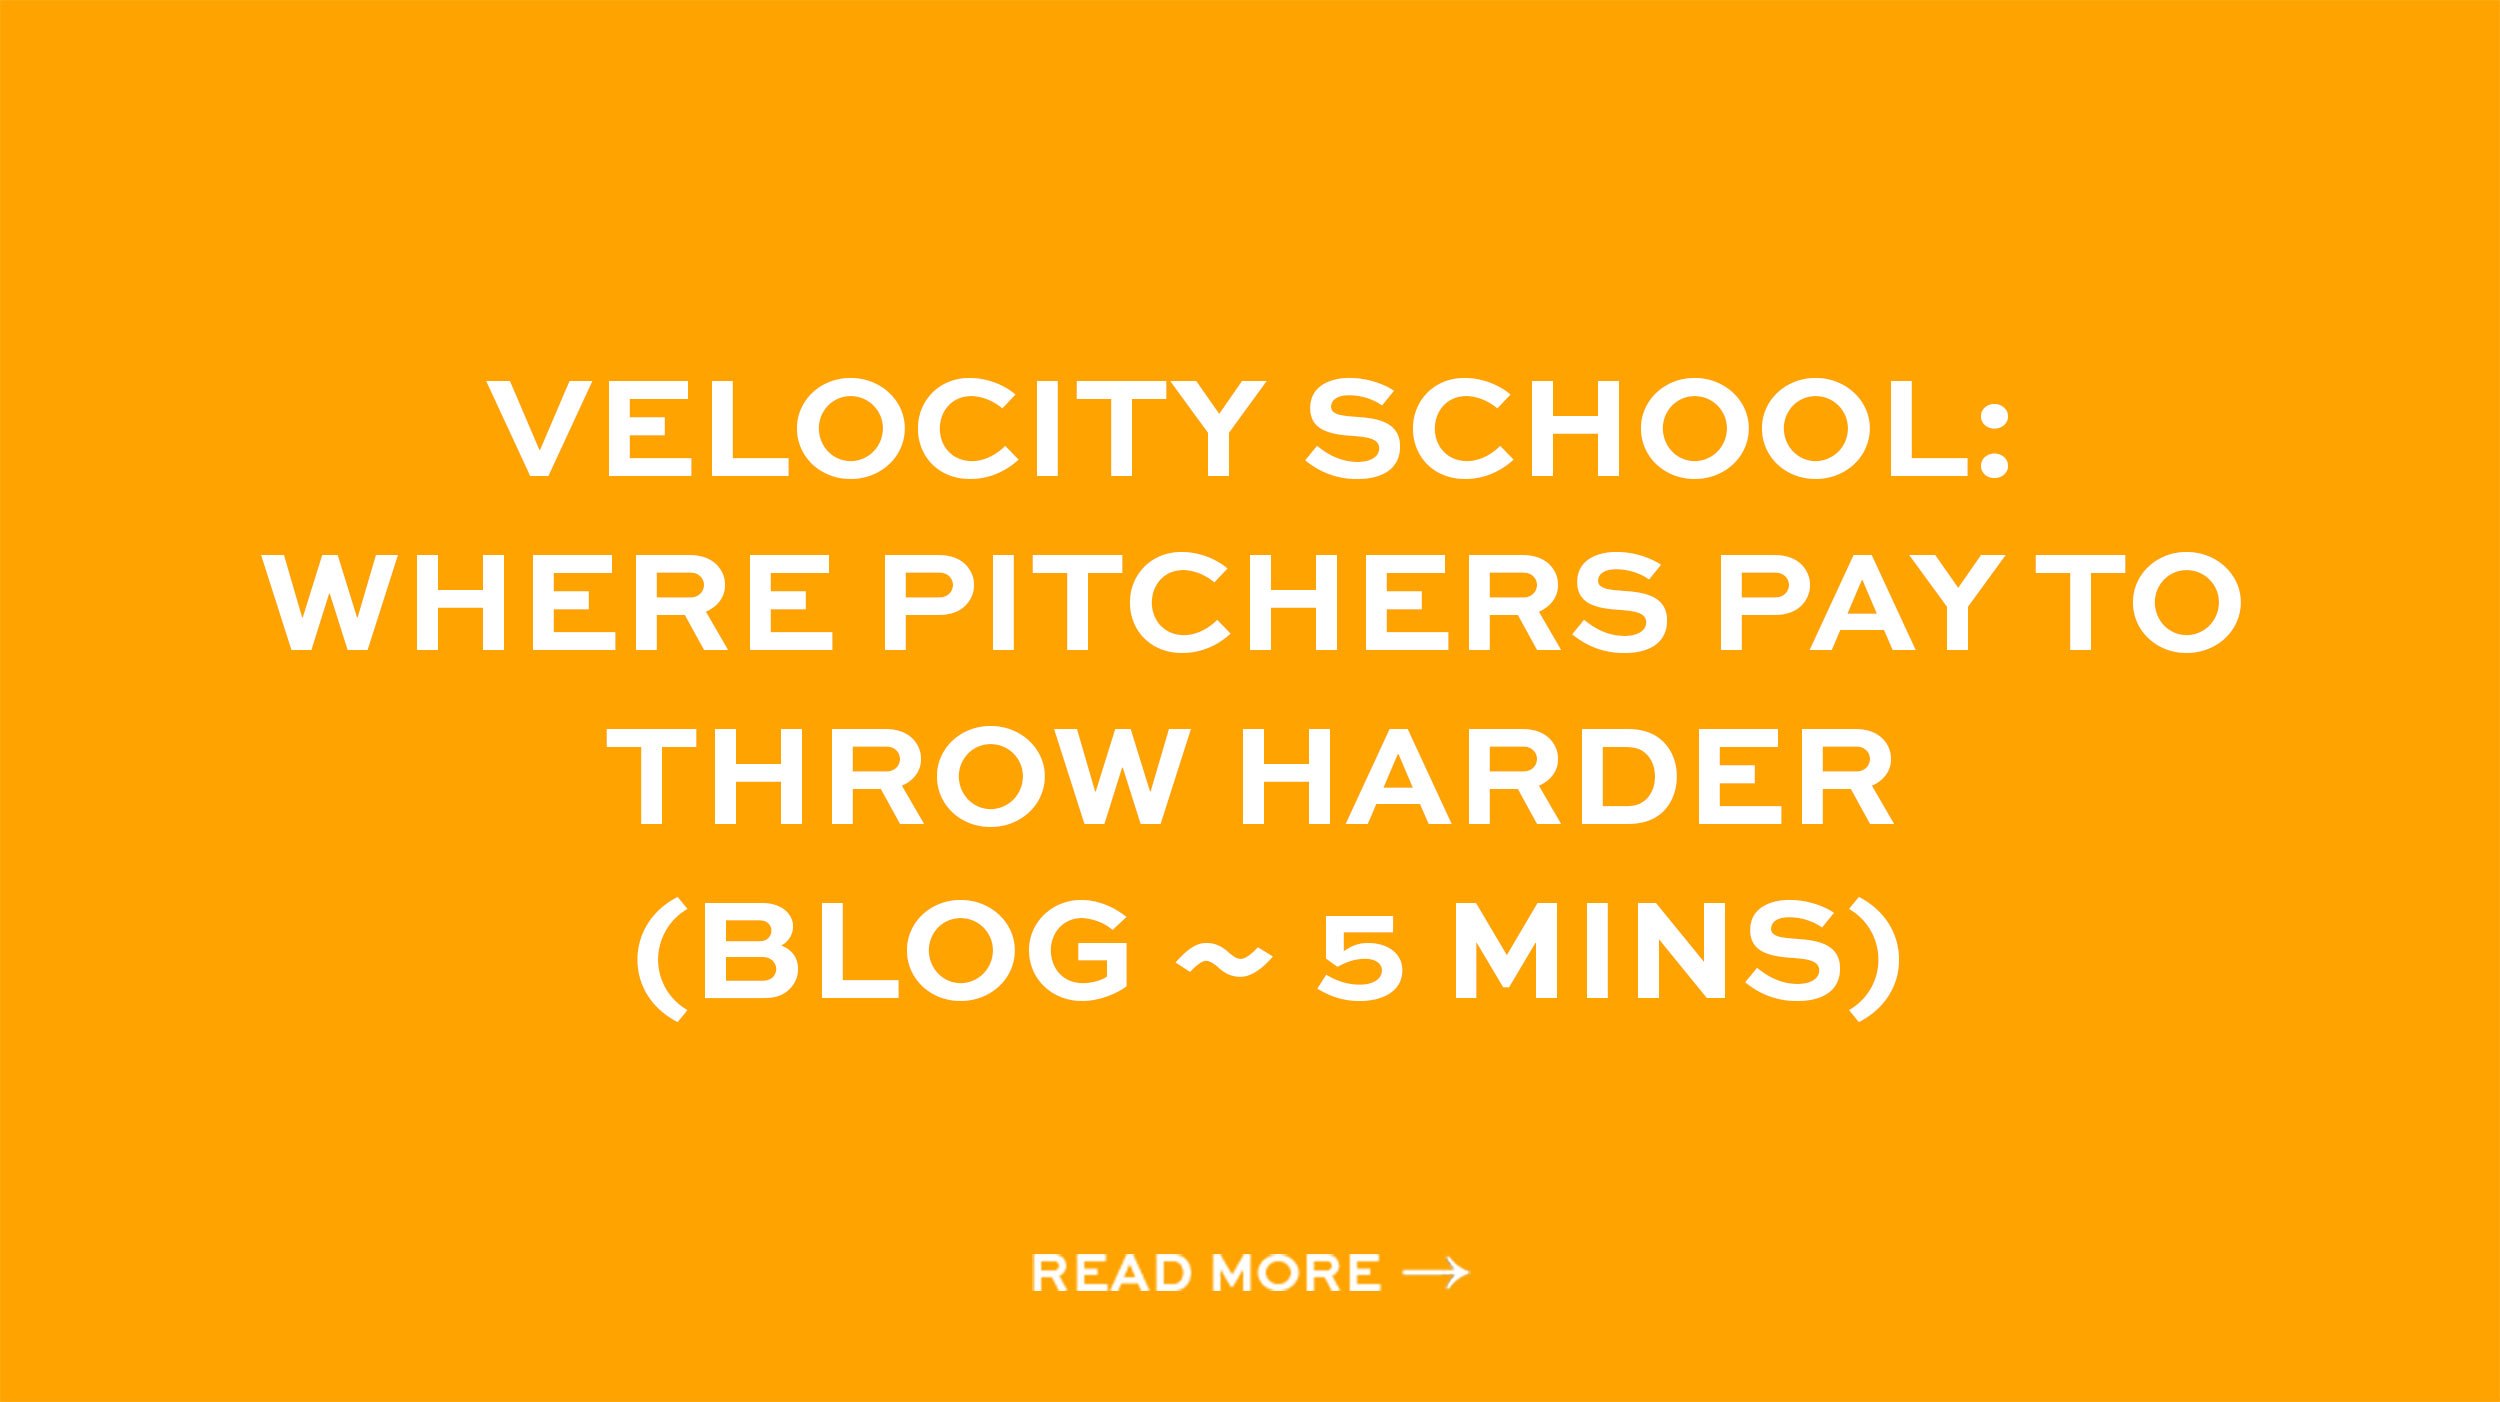 Velocity School: Where Pitchers Pay to Throw Harder (Blog ~ 5 mins)